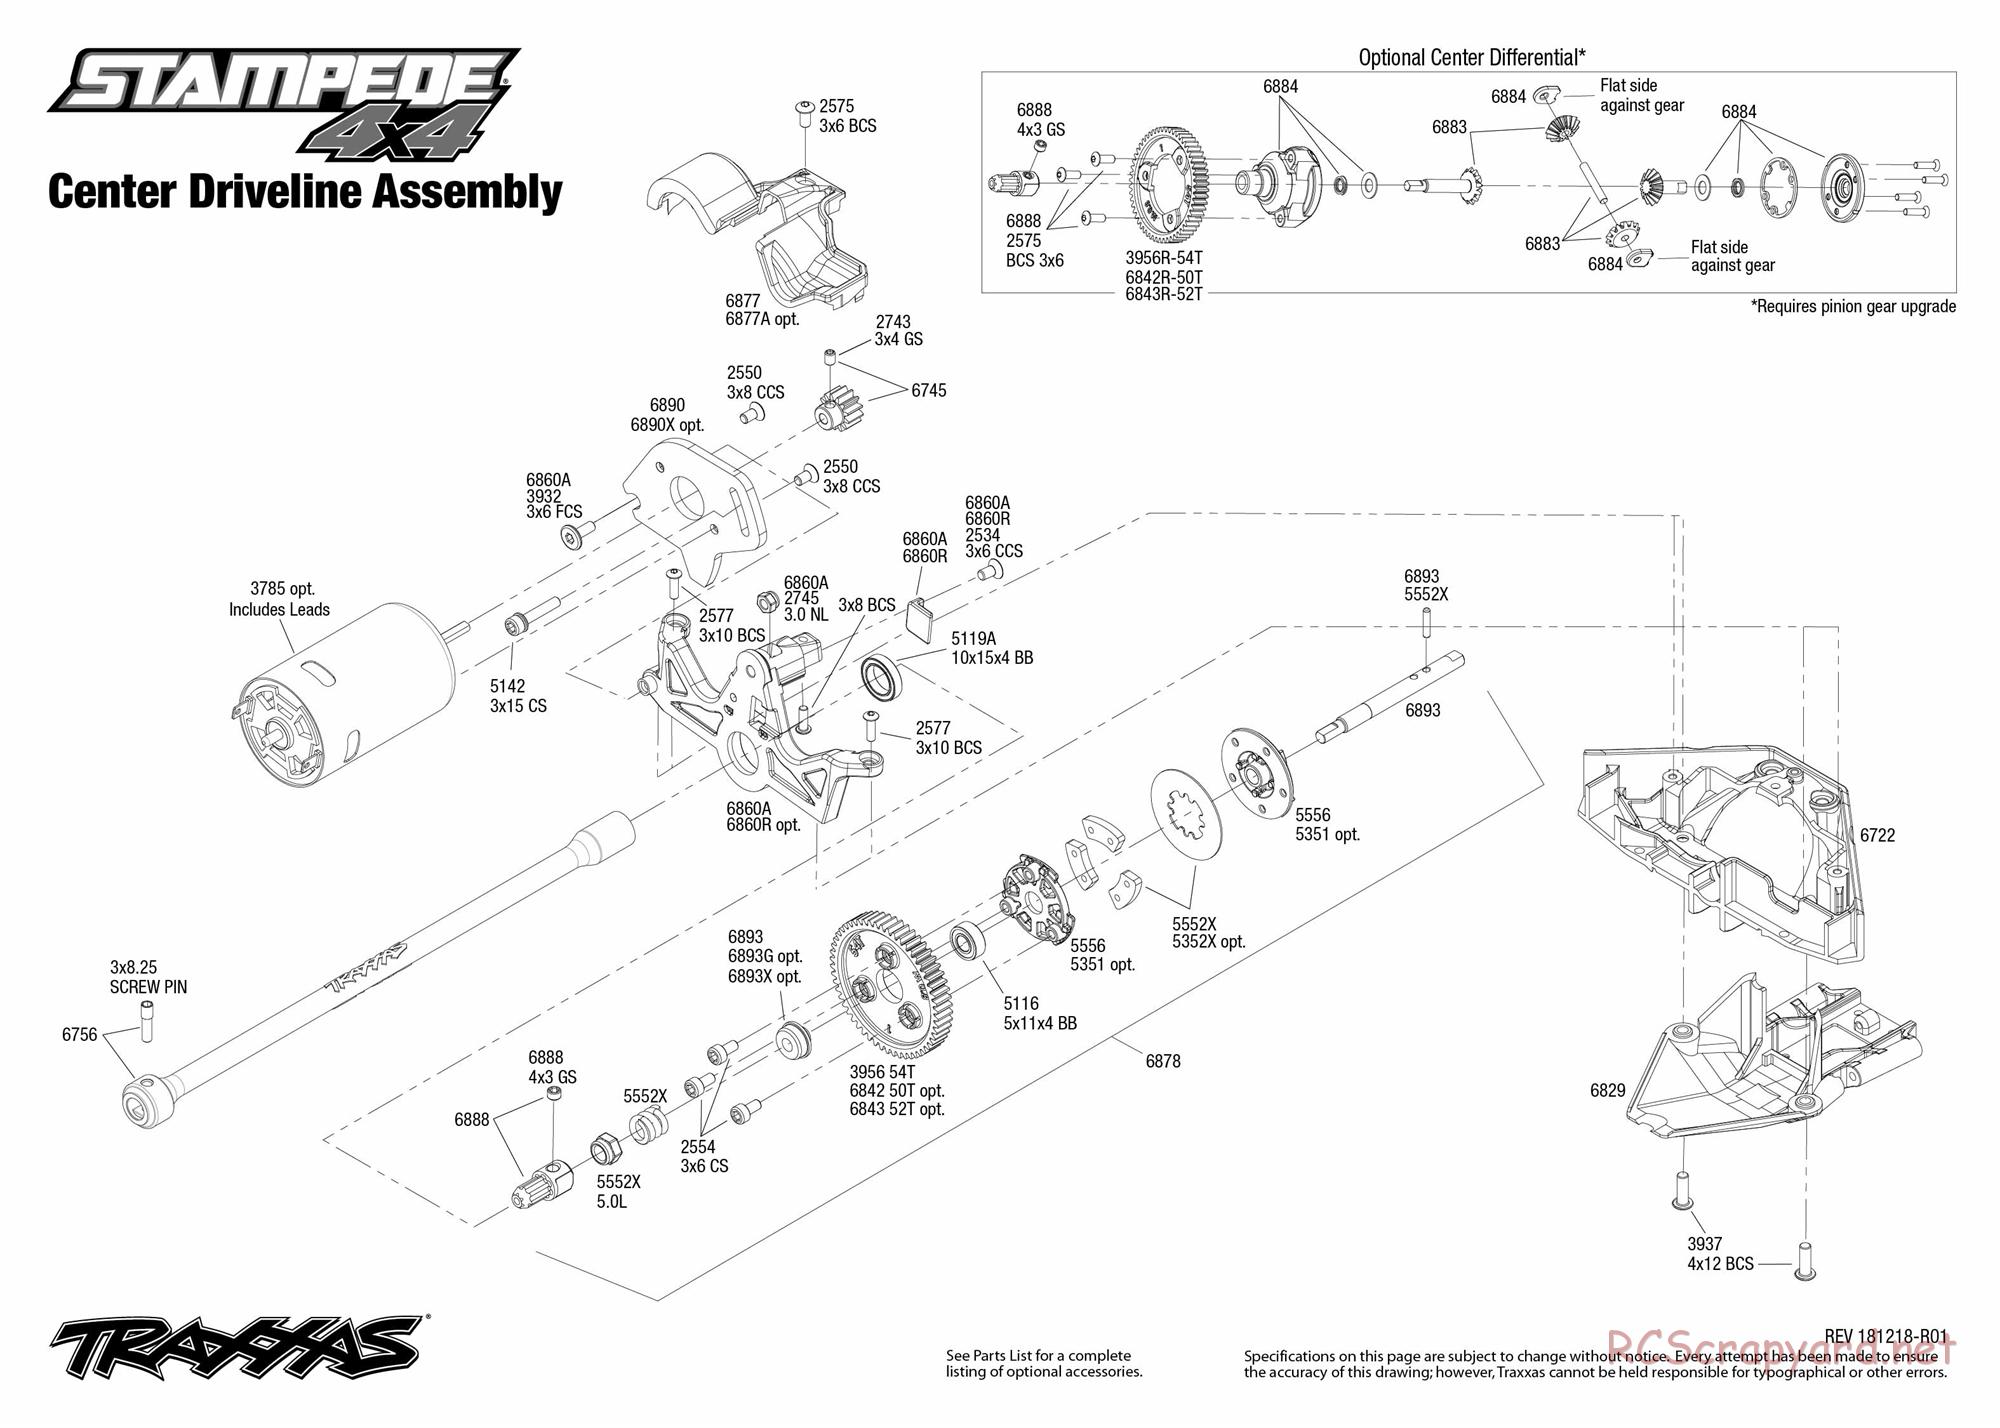 Traxxas - Stampede 4x4 (2019) - Exploded Views - Page 5